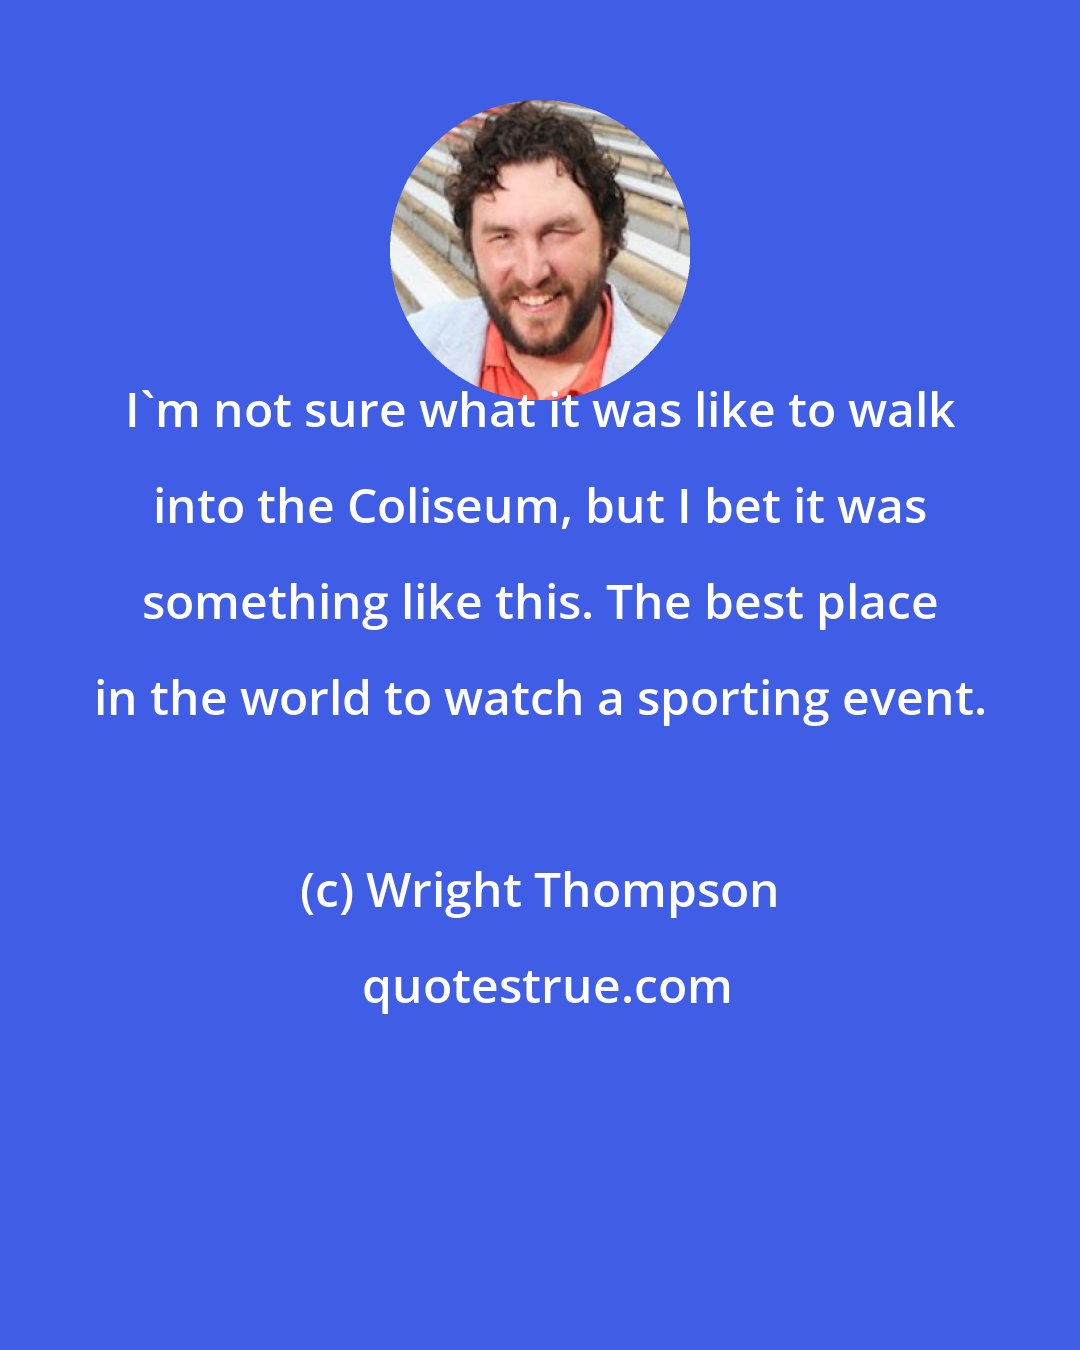 Wright Thompson: I'm not sure what it was like to walk into the Coliseum, but I bet it was something like this. The best place in the world to watch a sporting event.